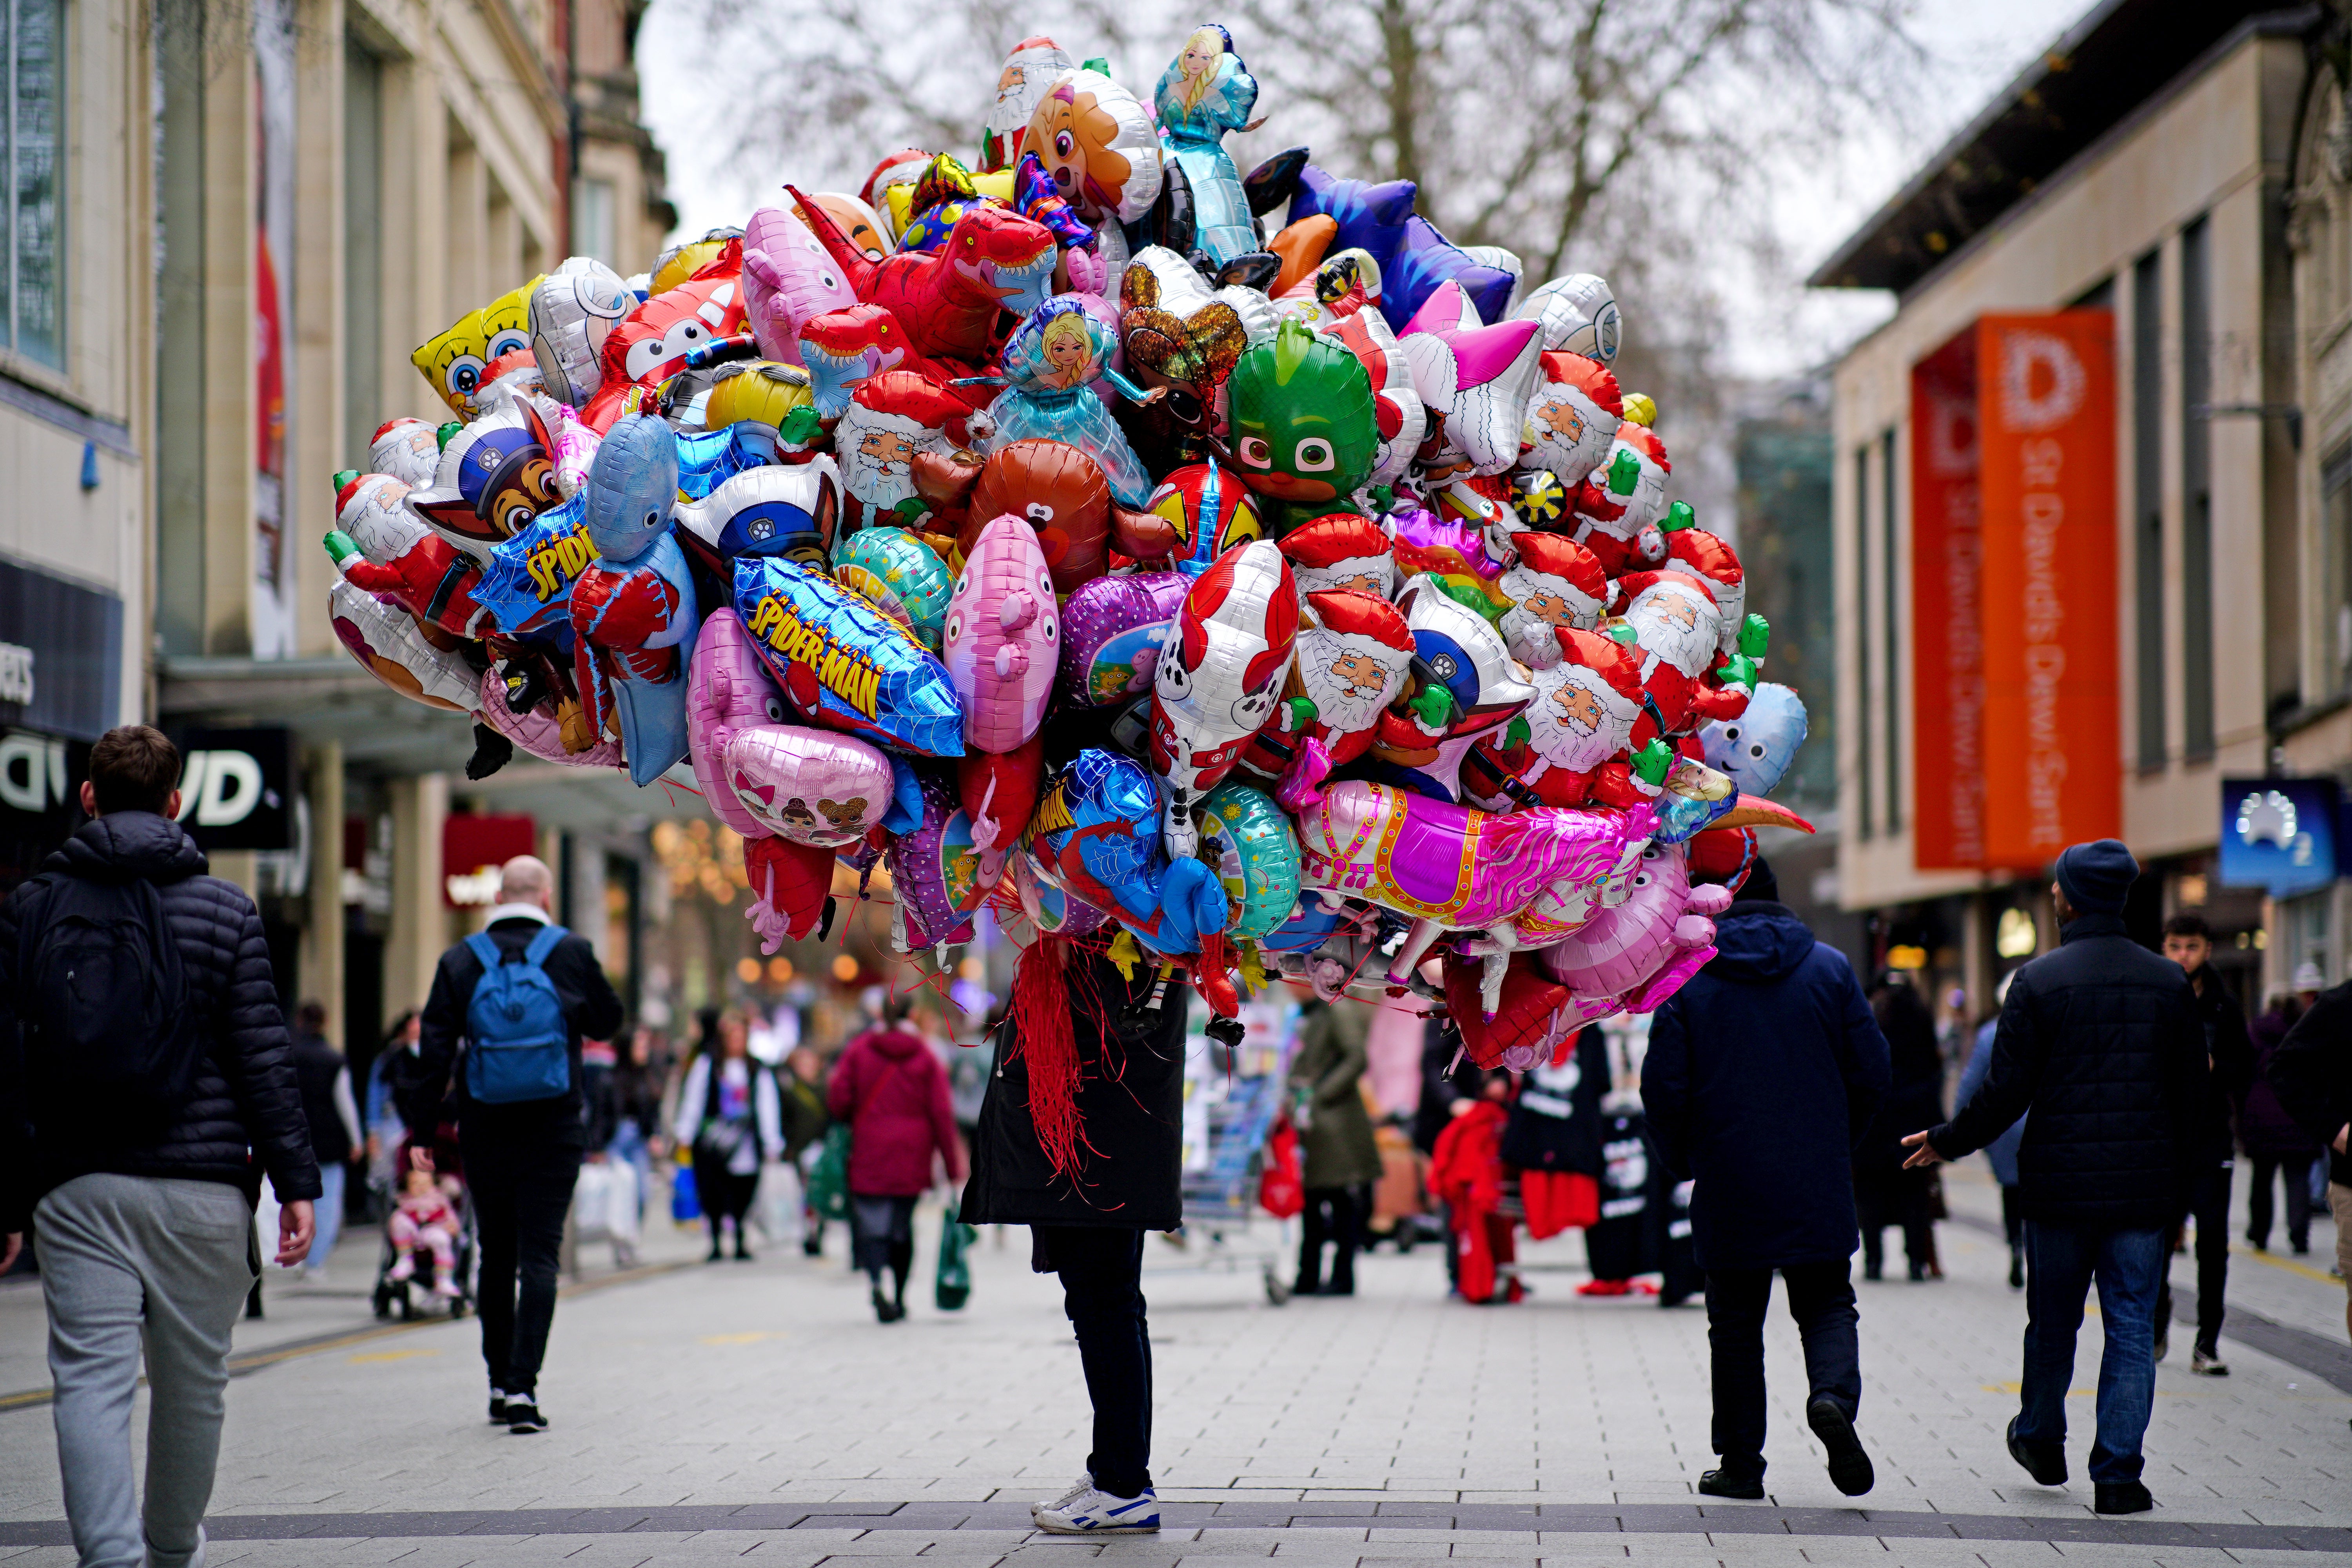 A balloon vendor is passed by Christmas shoppers in the centre of Cardiff in December (Ben Birchall/PA)